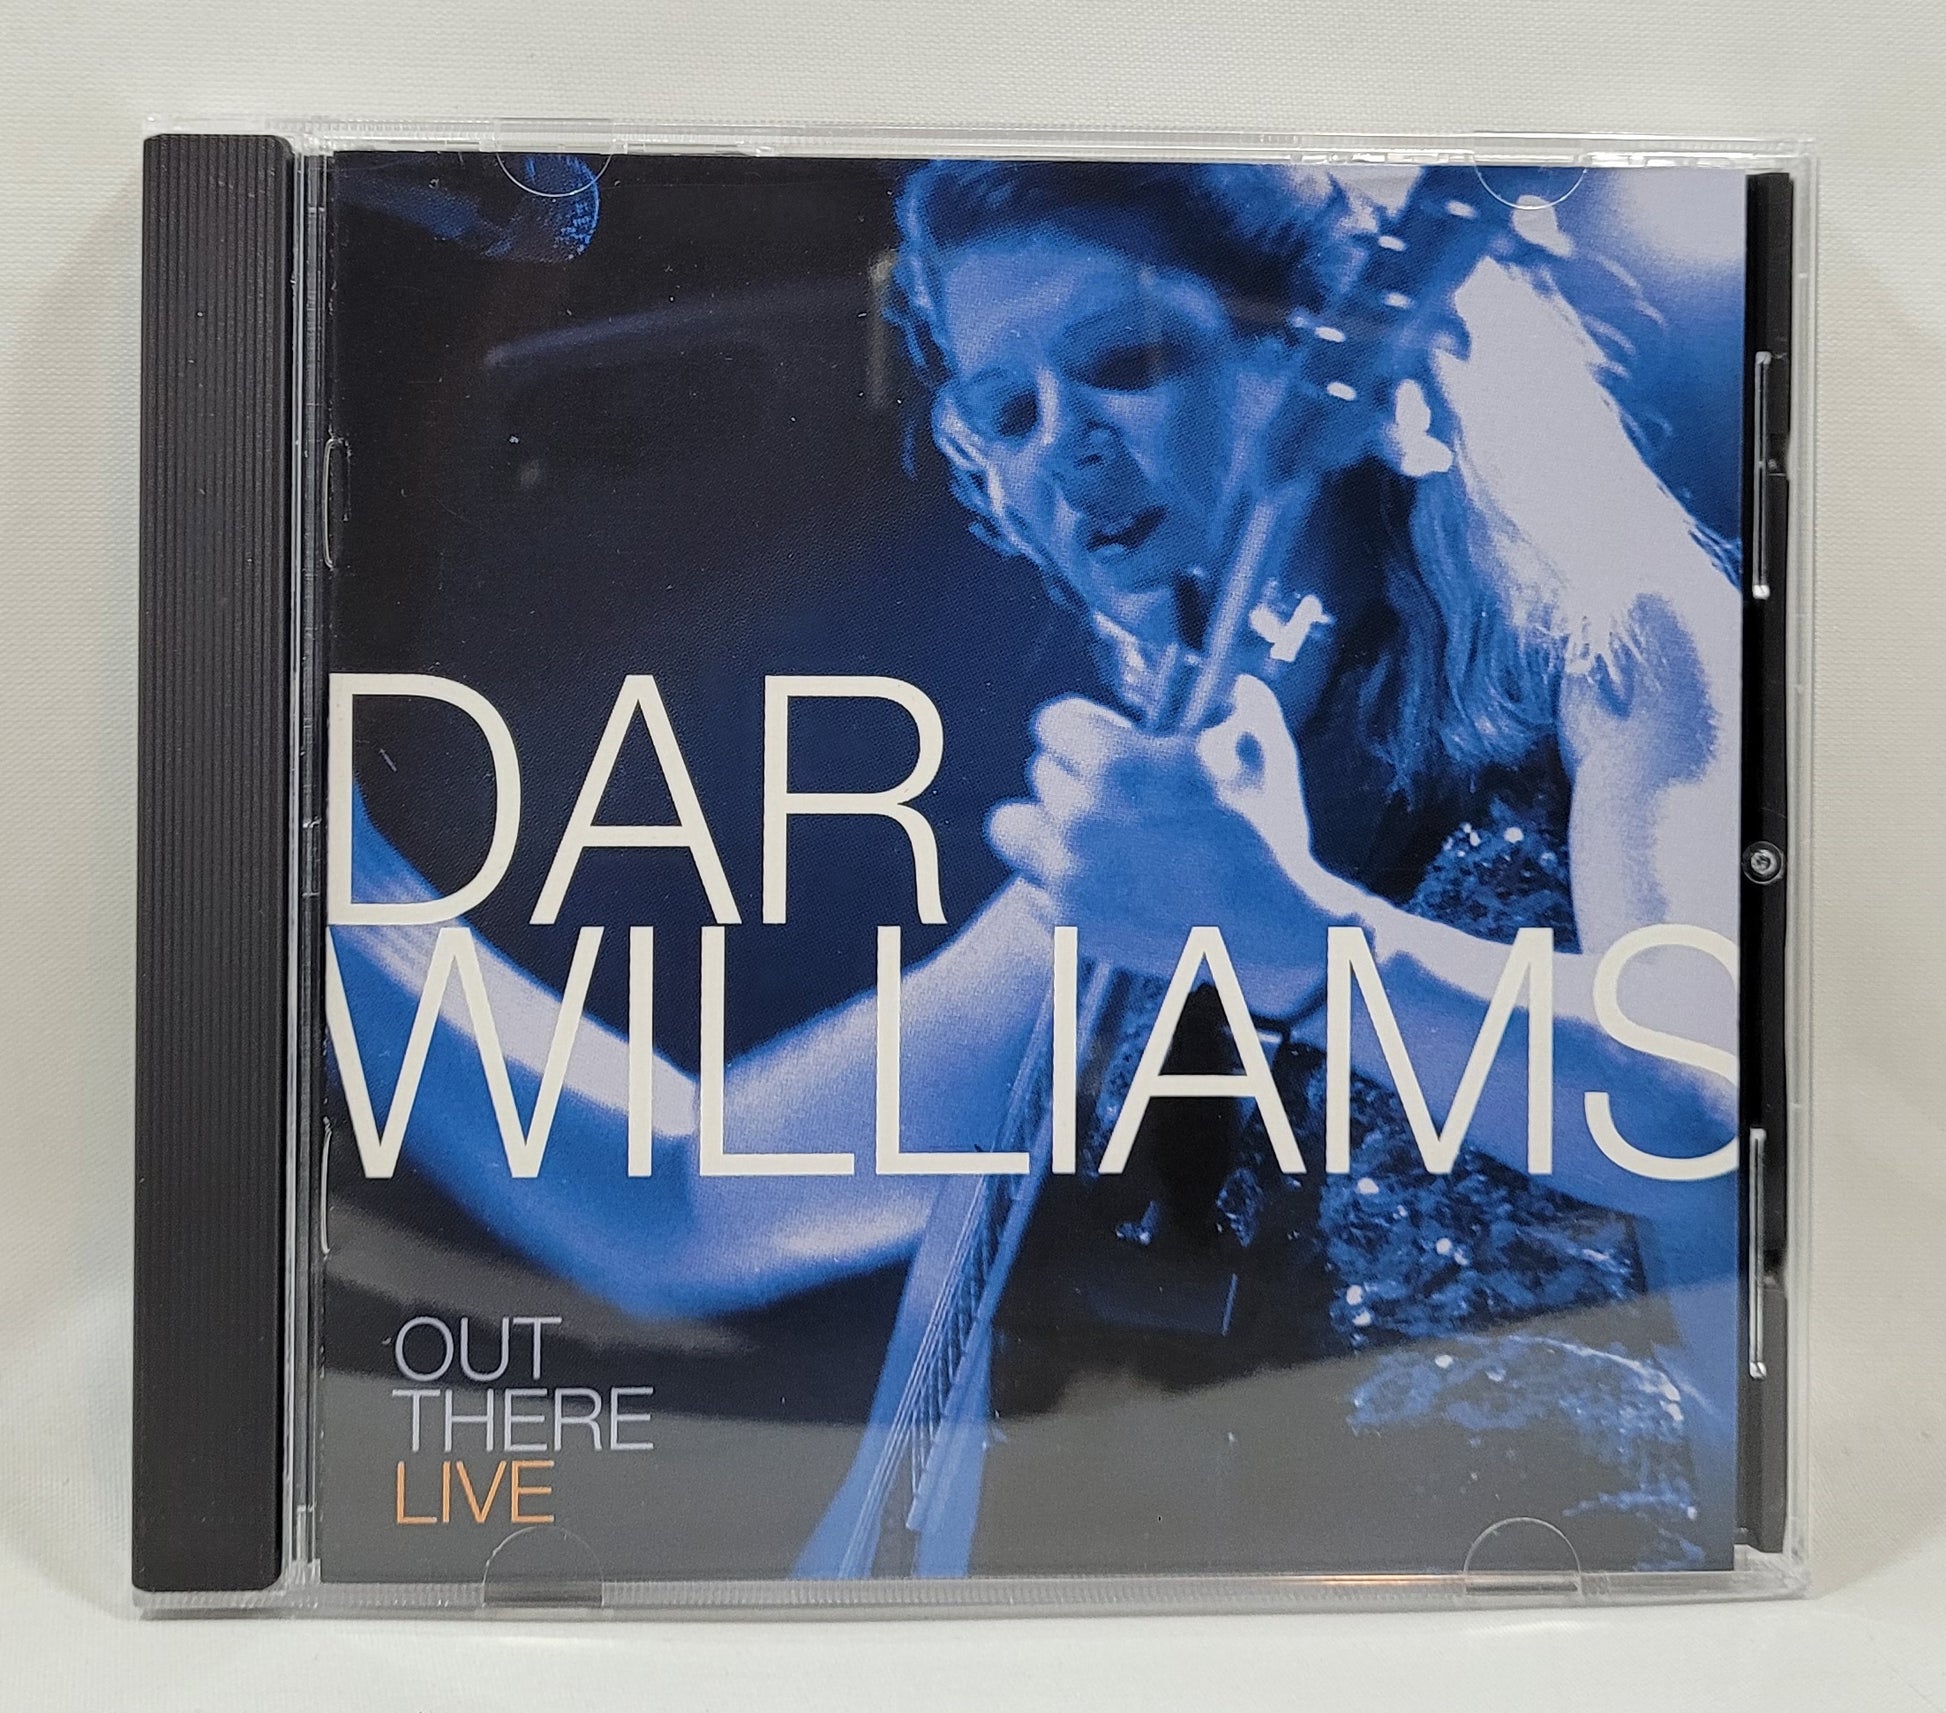 Dar Williams - Out There Live [2001 Used CD]